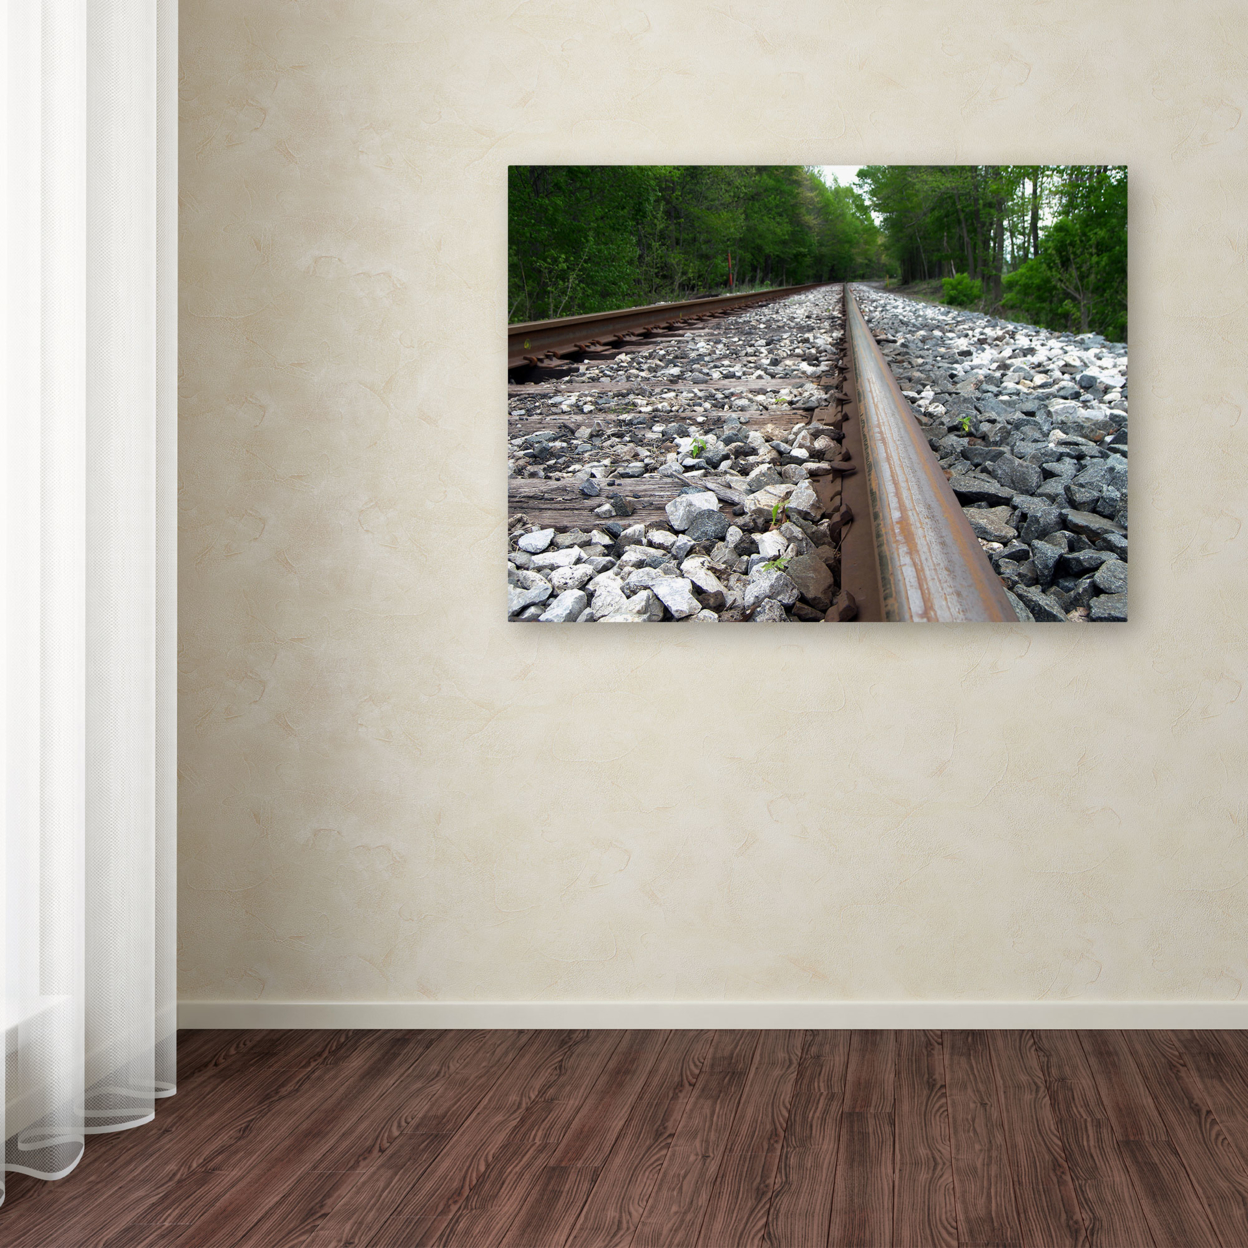 Monica Fleet 'Guided Journey' Canvas Wall Art 35 X 47 Inches